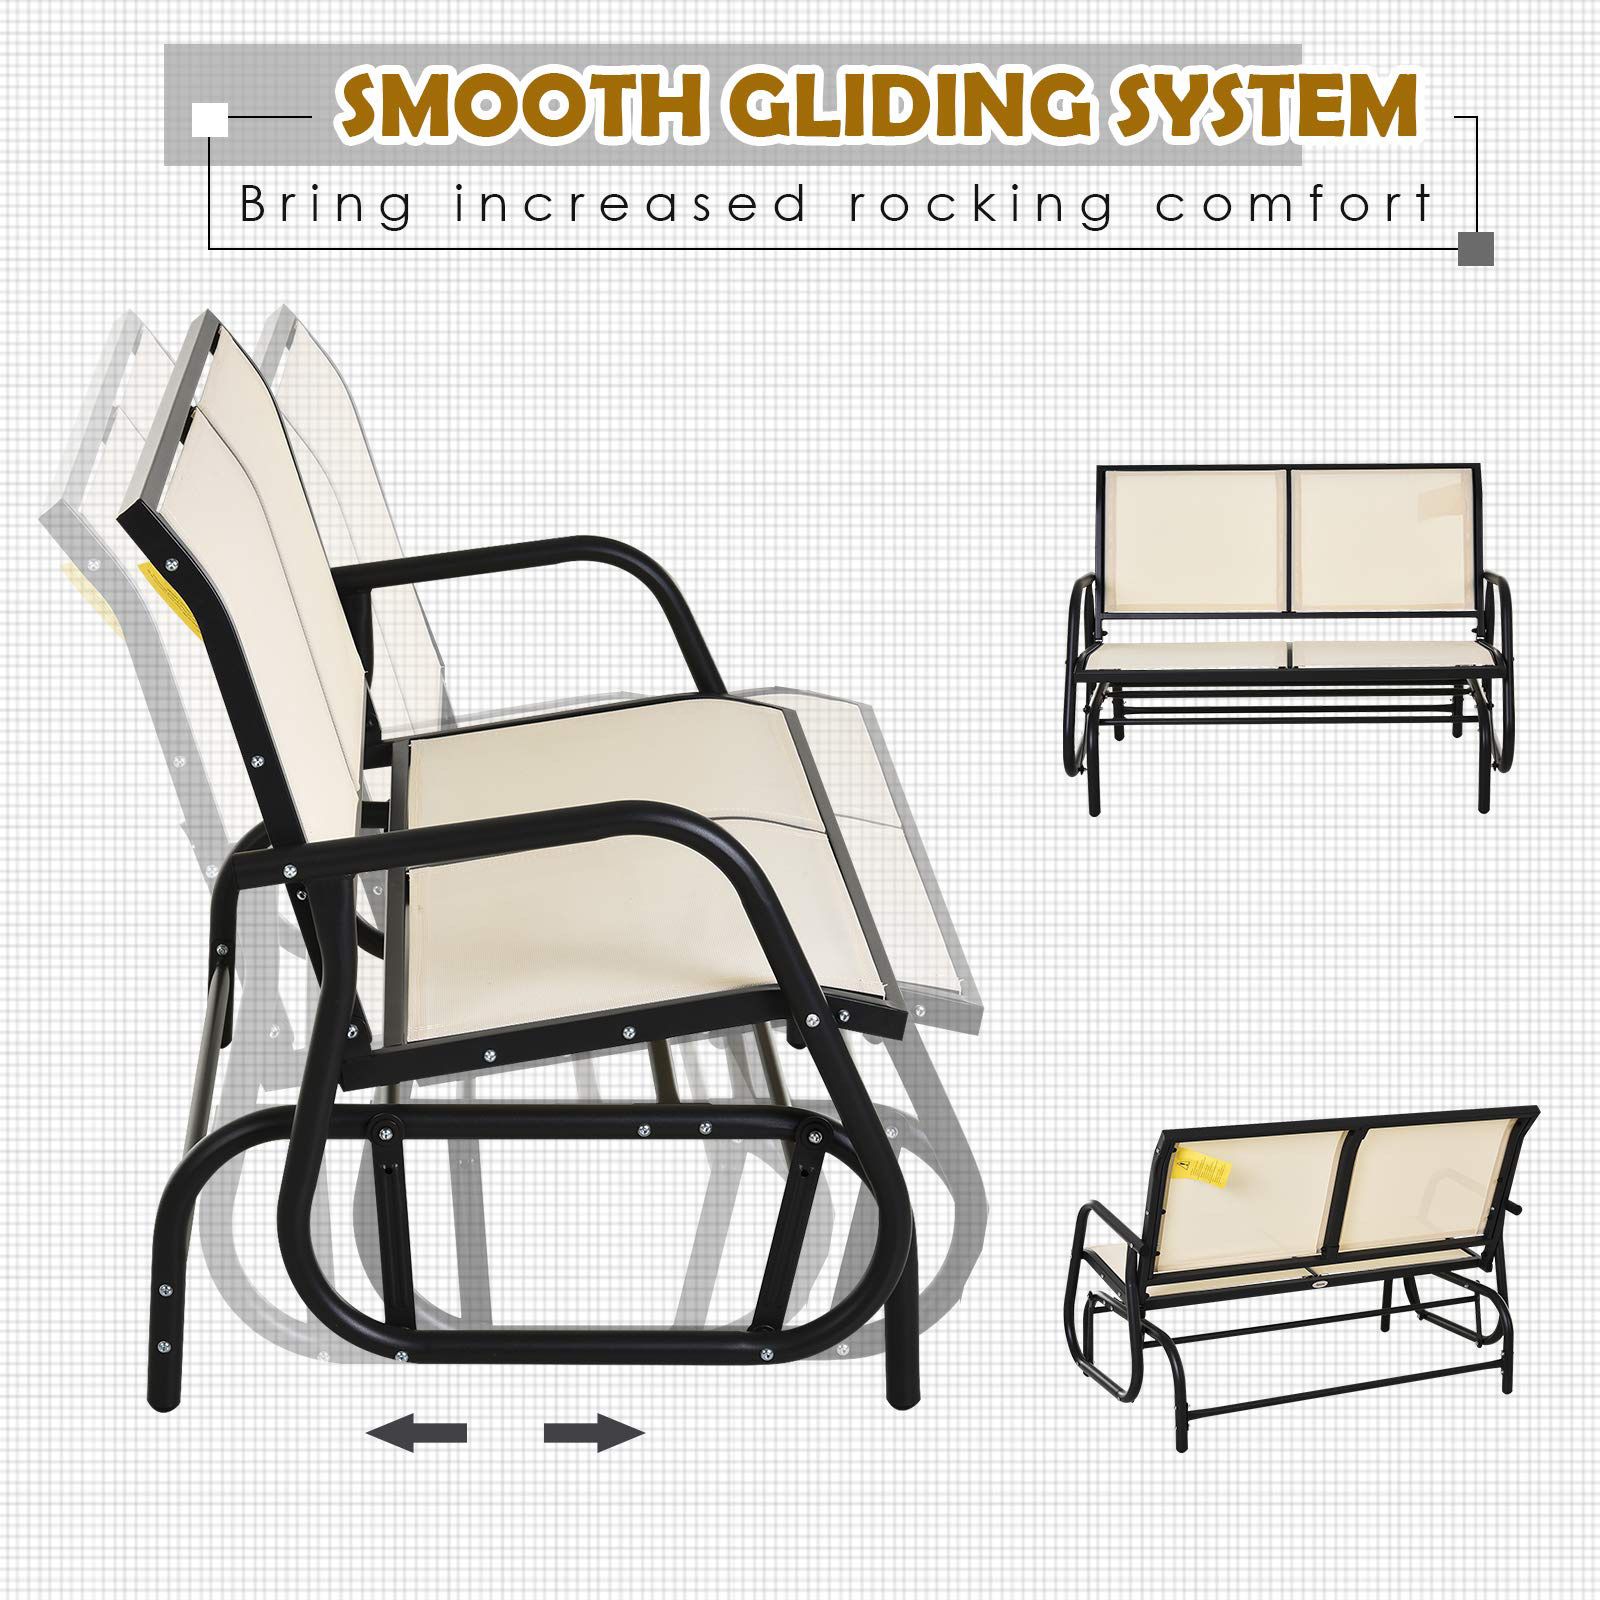 🎉 BRAND NEW Outsunny Outdoor Double Rocking Chäir with a Comfortable Sling Fabric Backing, Steel Frame, Curved Rocking Arms, Beige